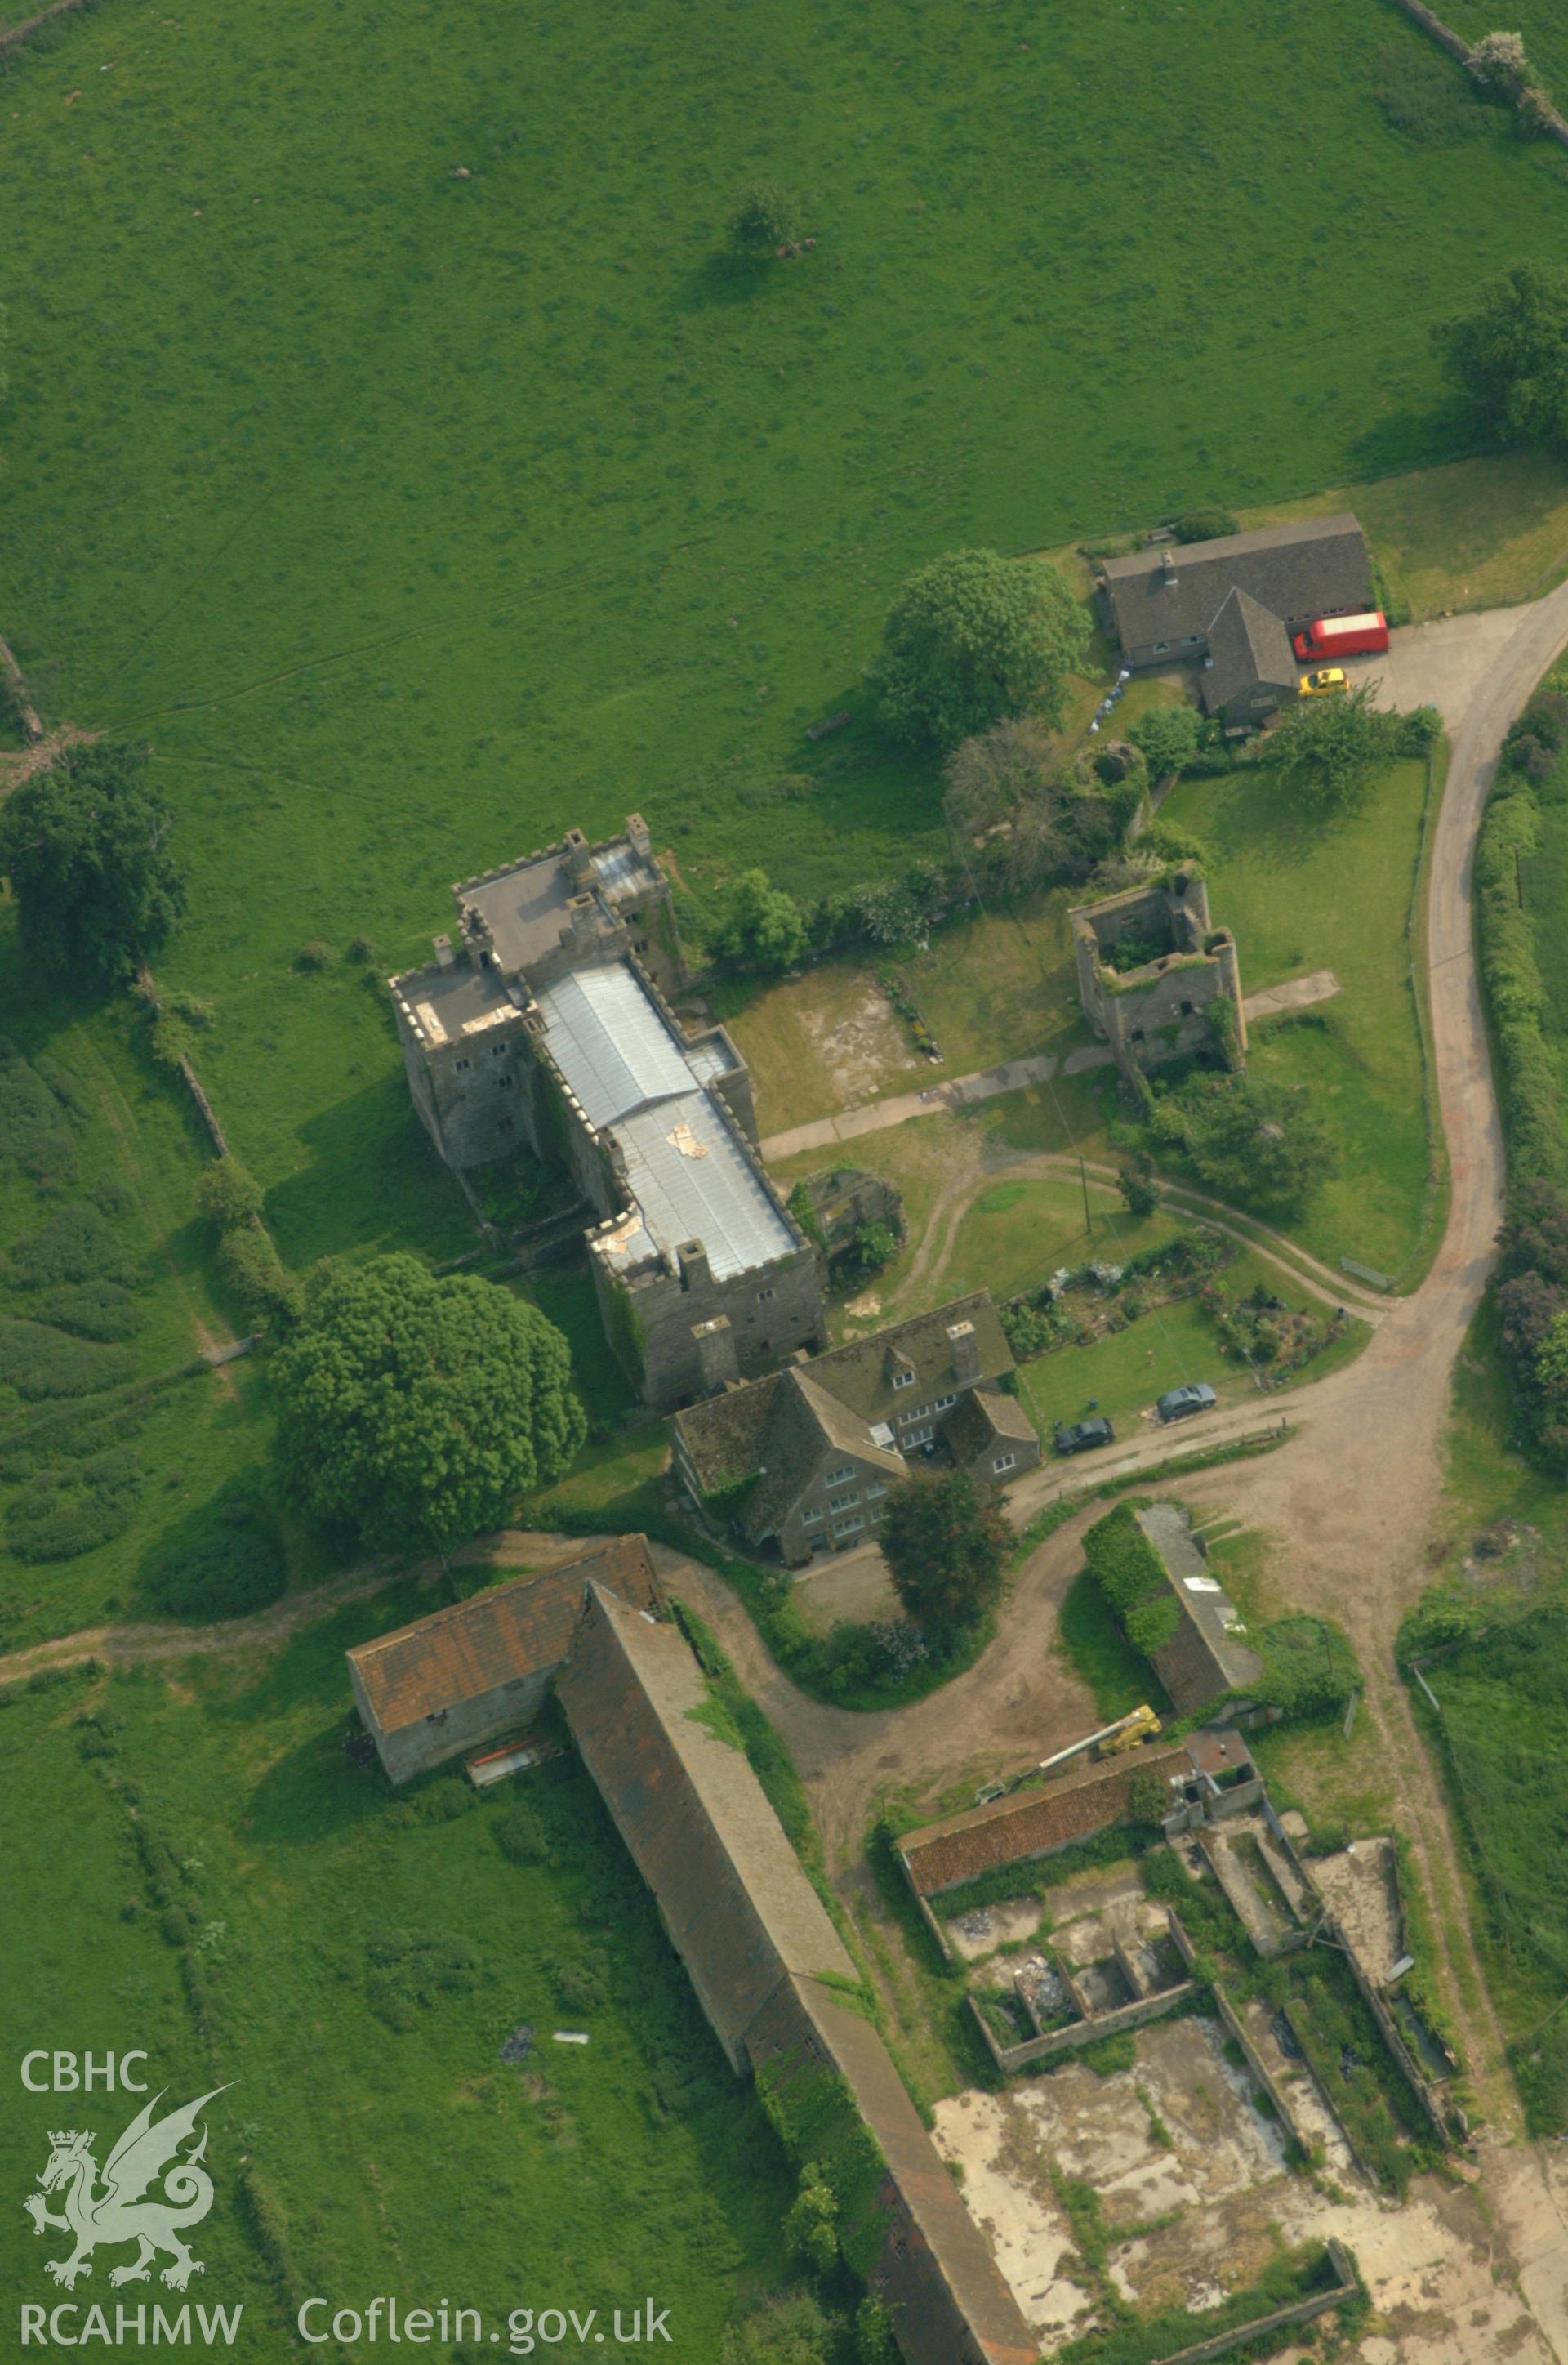 RCAHMW colour oblique aerial photograph of Pencoed Castle, Llanmartin taken on 26/05/2004 by Toby Driver